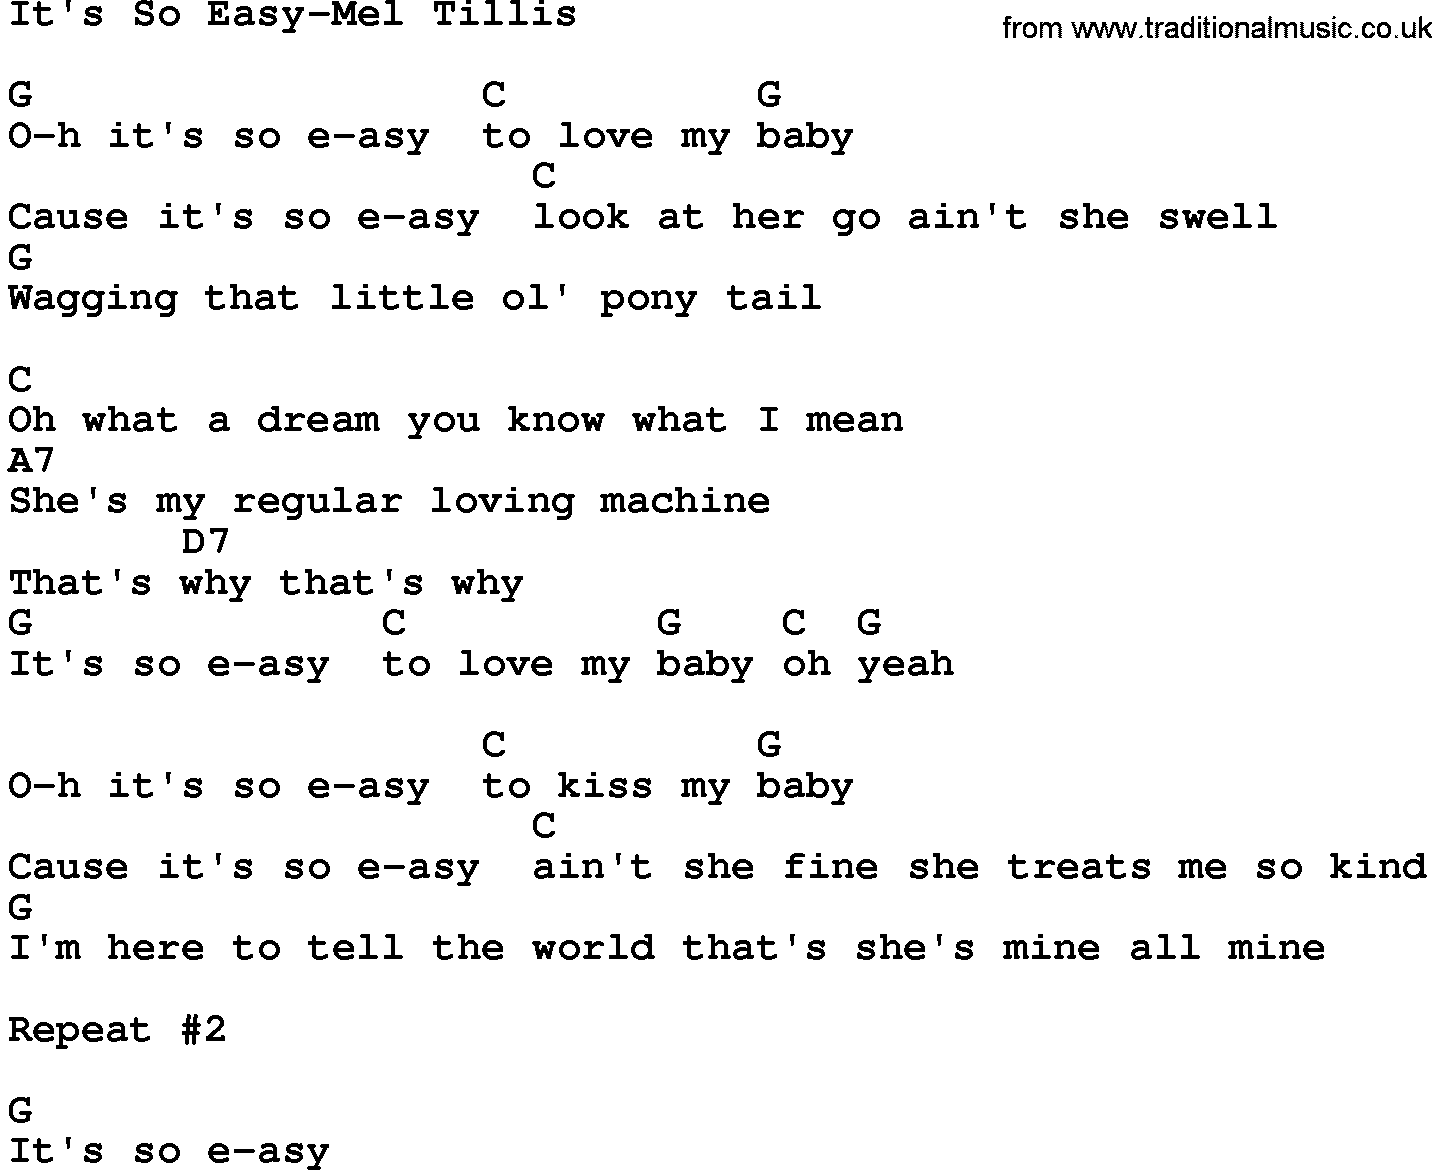 Country music song: It's So Easy-Mel Tillis lyrics and chords